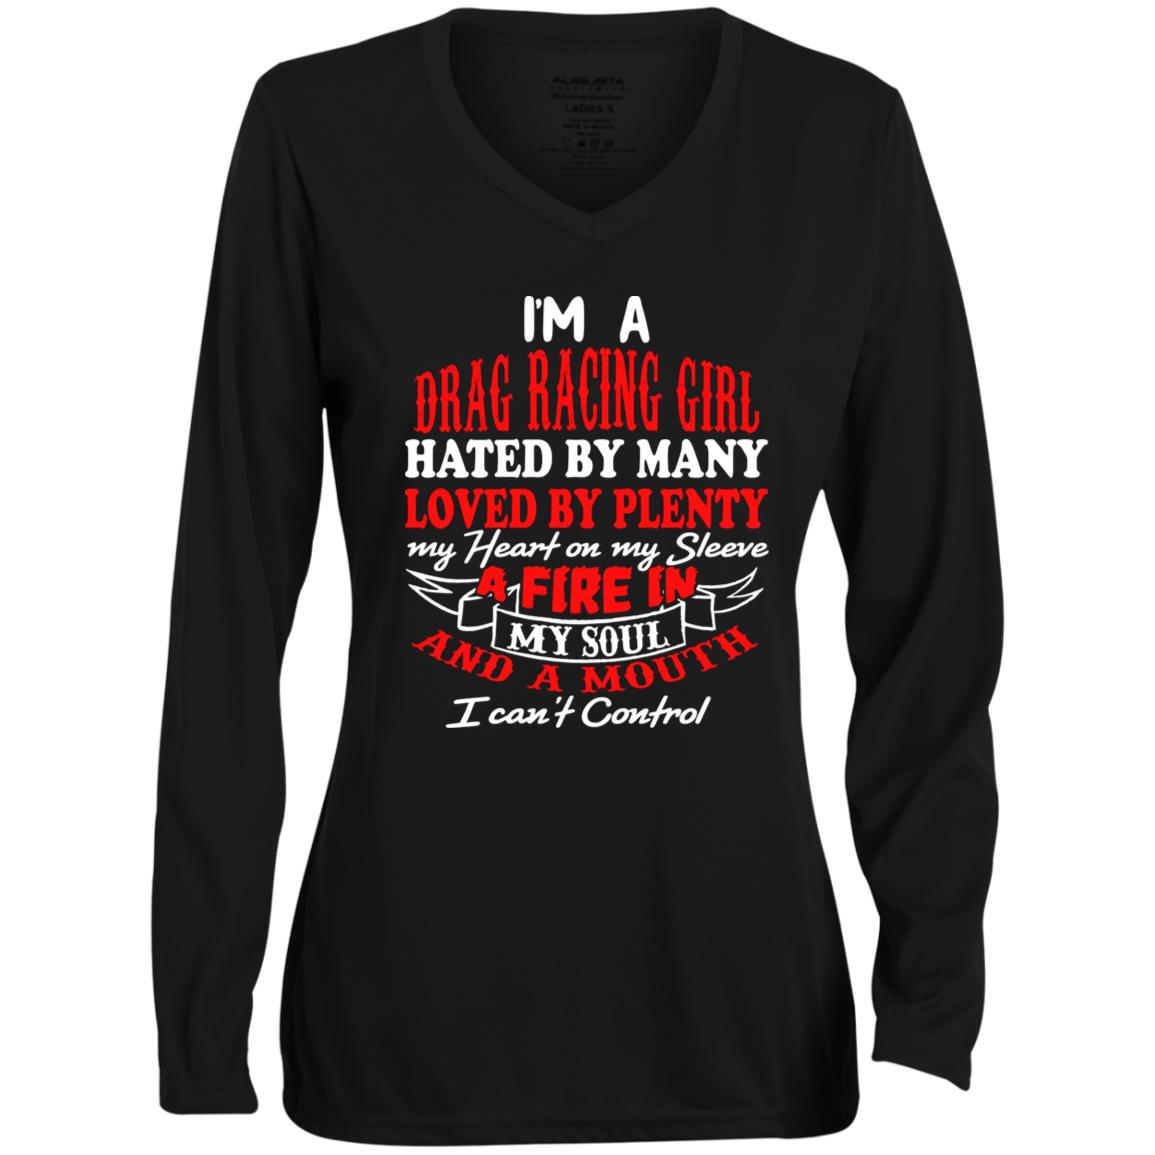 I'm A Drag Racing Girl Hated By Many Loved By Plenty Ladies' Moisture-Wicking Long Sleeve V-Neck Tee